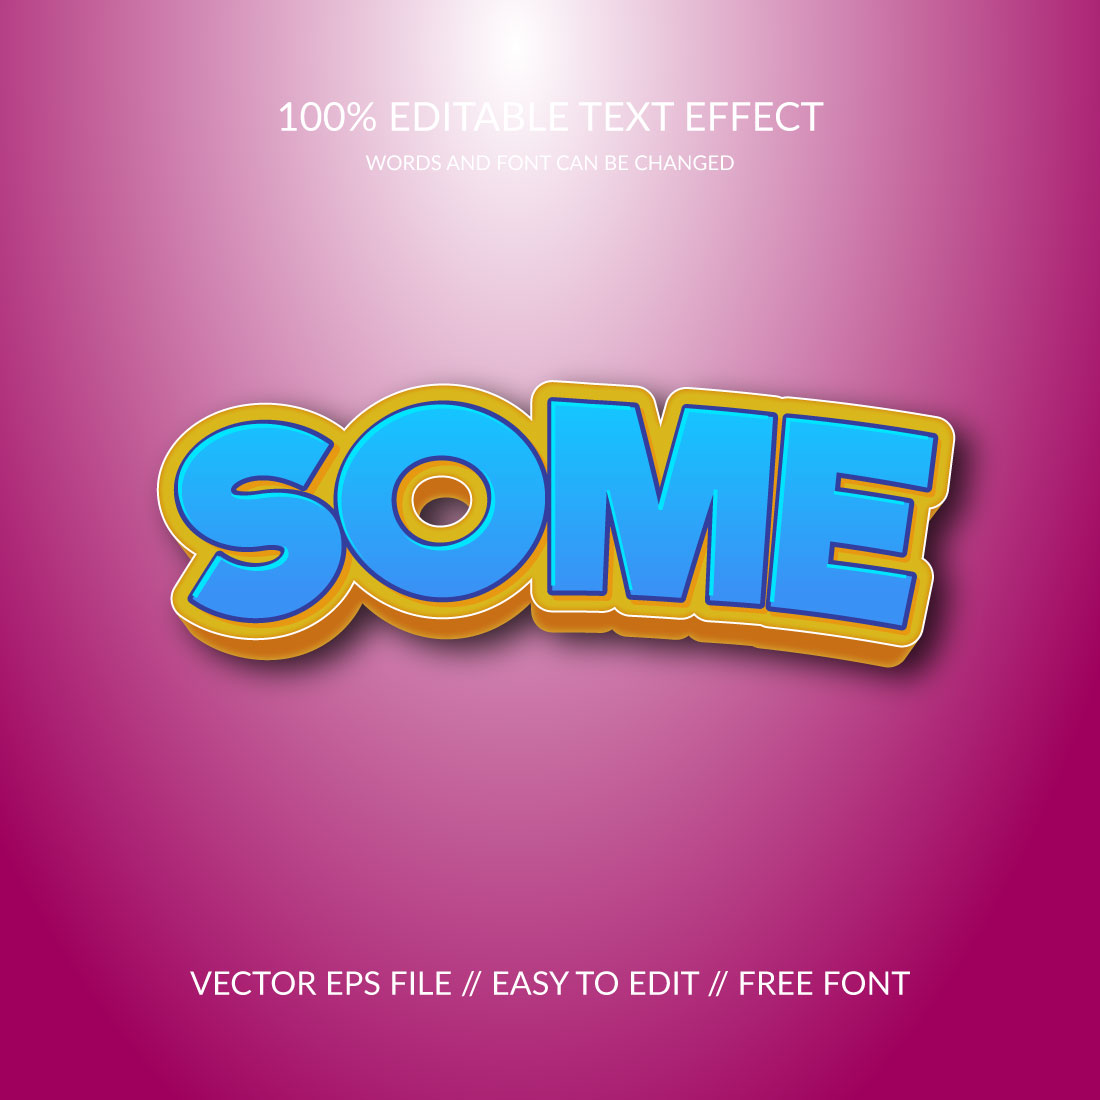 Some 3d editable text effect design preview image.